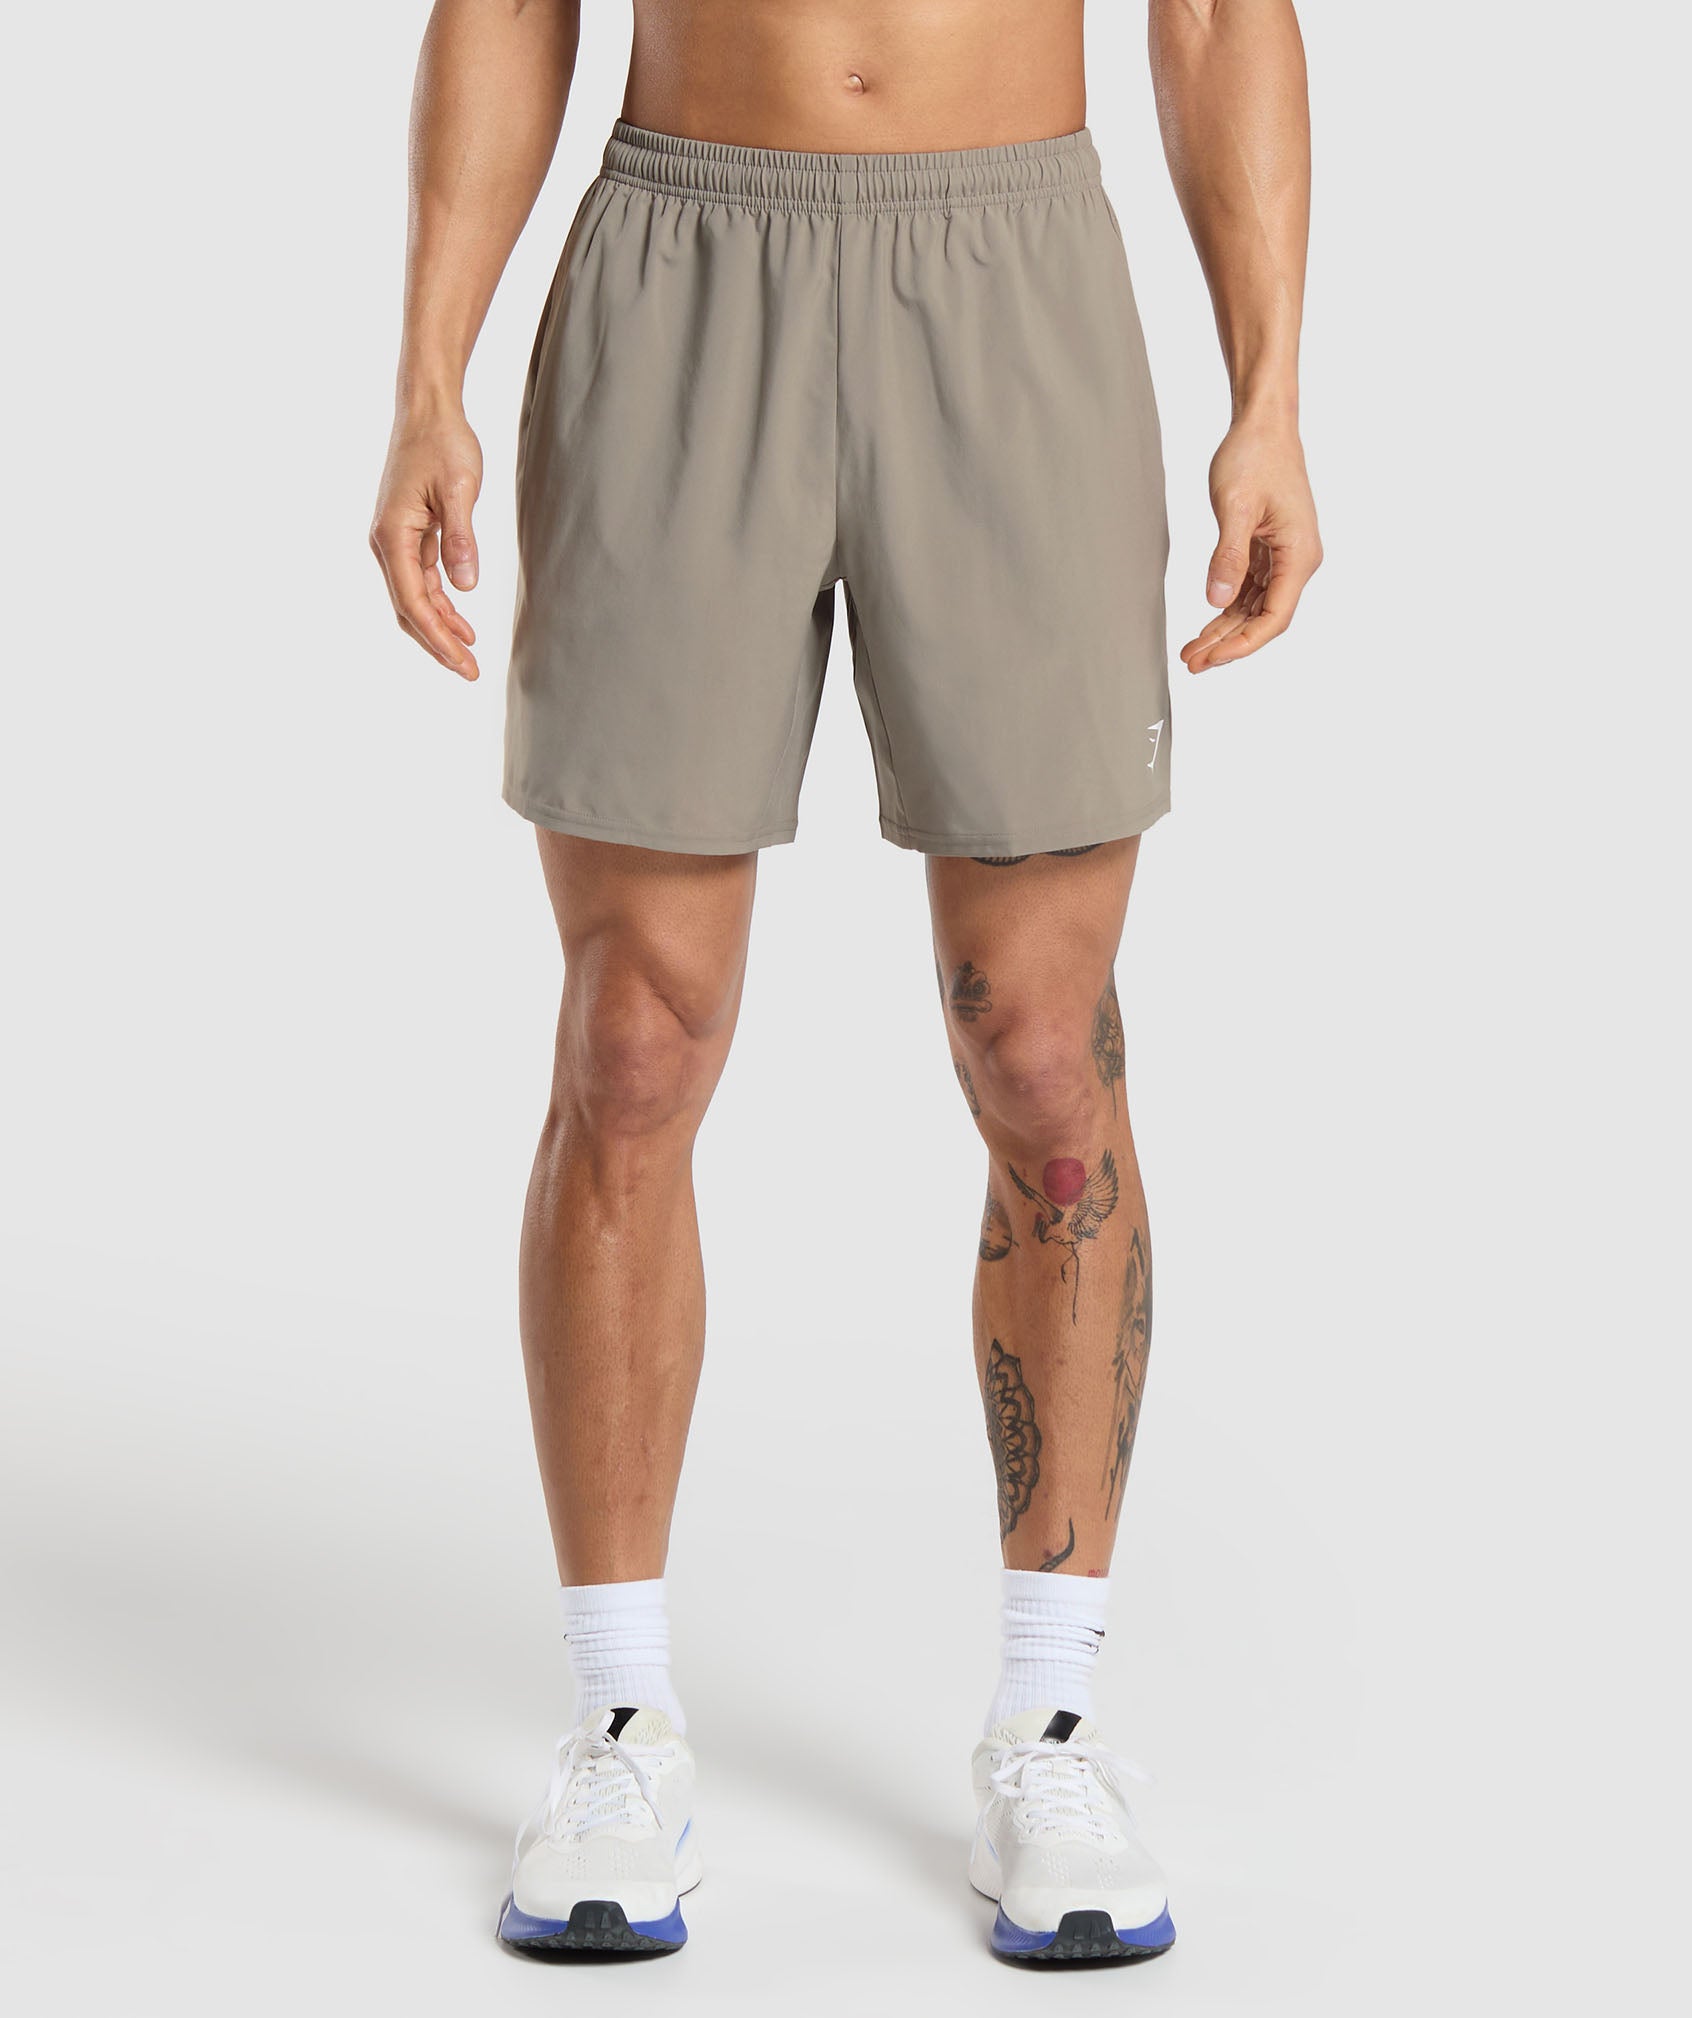 Arrival 7" Shorts in Linen Brown